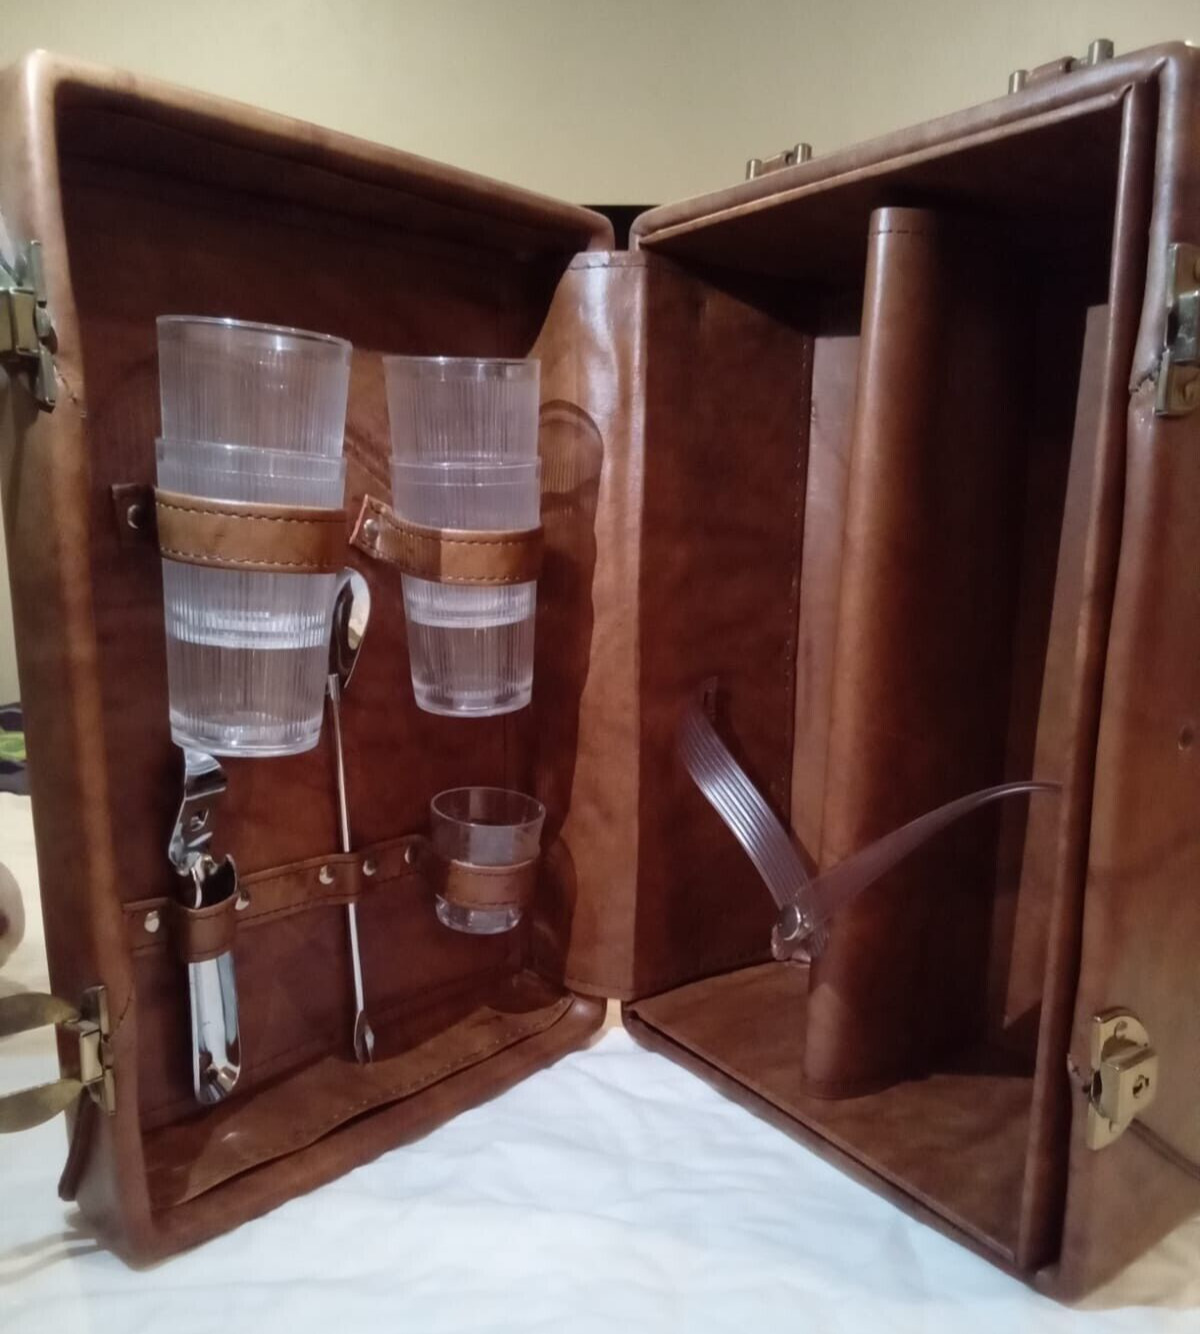 Vintage Travel Bar Set - Beautiful and Unique Carry Case with Top Handle